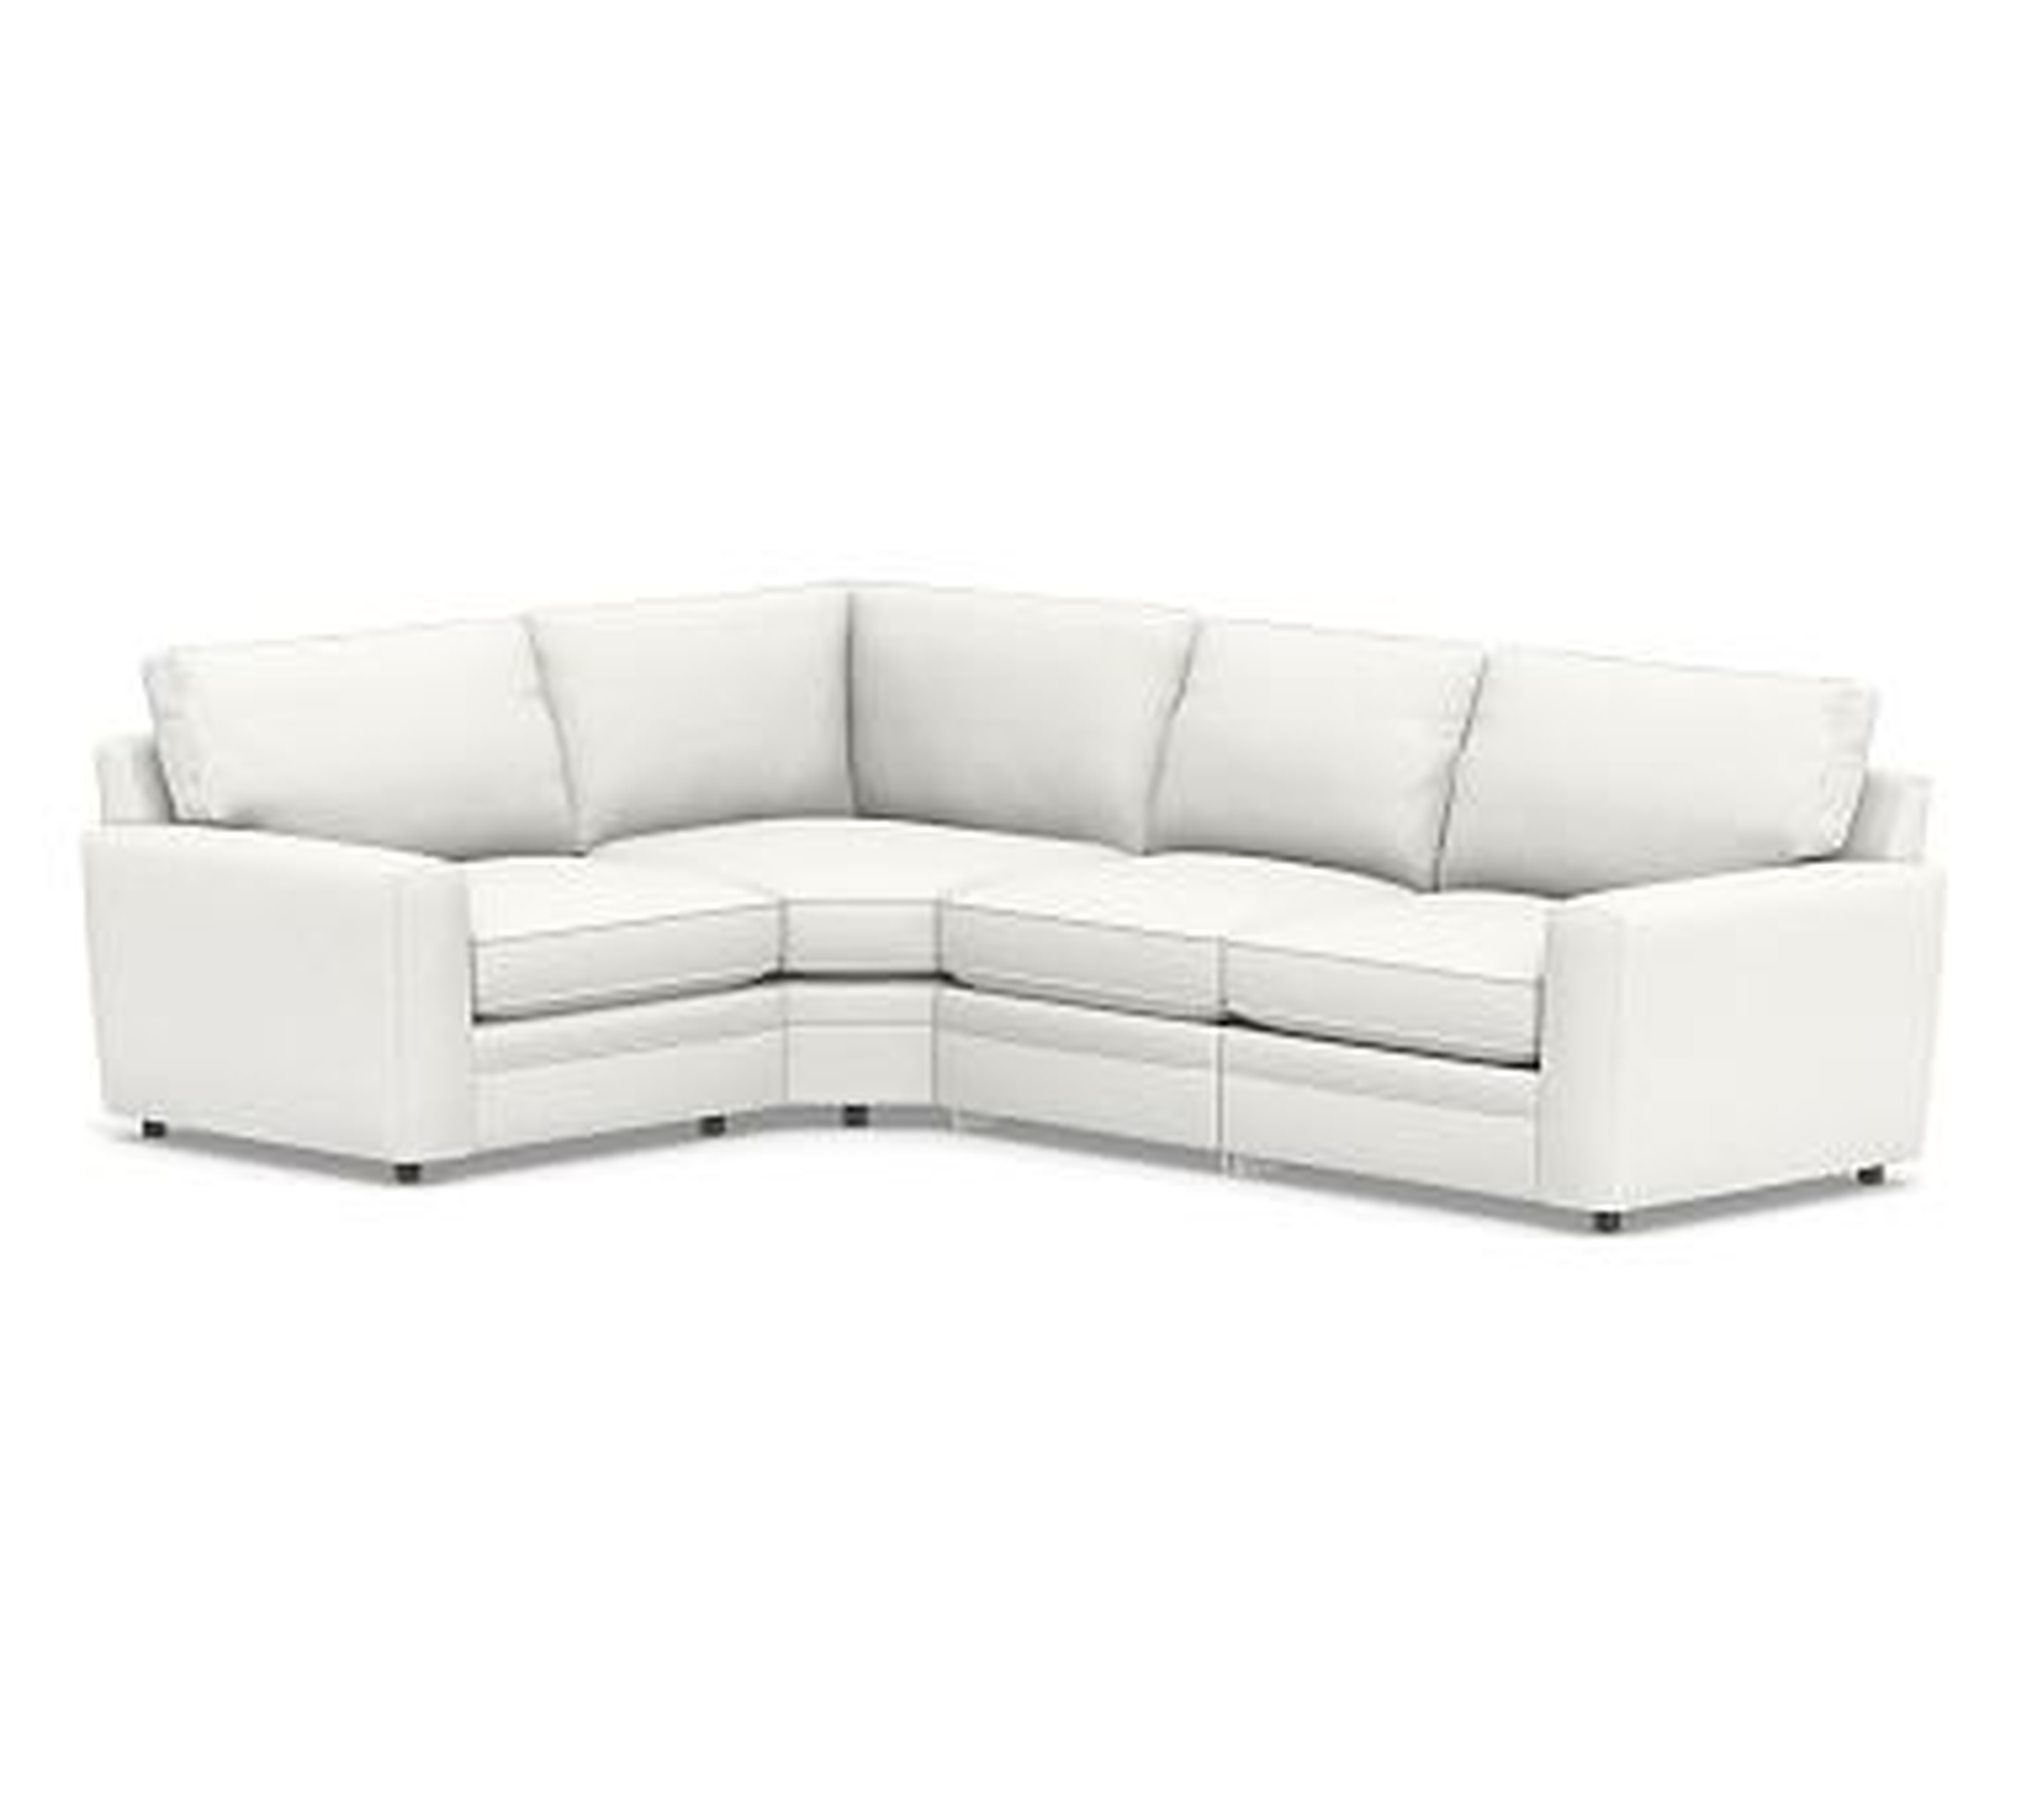 Pearce Square Arm Upholstered Right Arm 4-Piece Reclining Wedge Sectional, Down Blend Wrapped Cushions, Performance Slub Cotton White - Pottery Barn